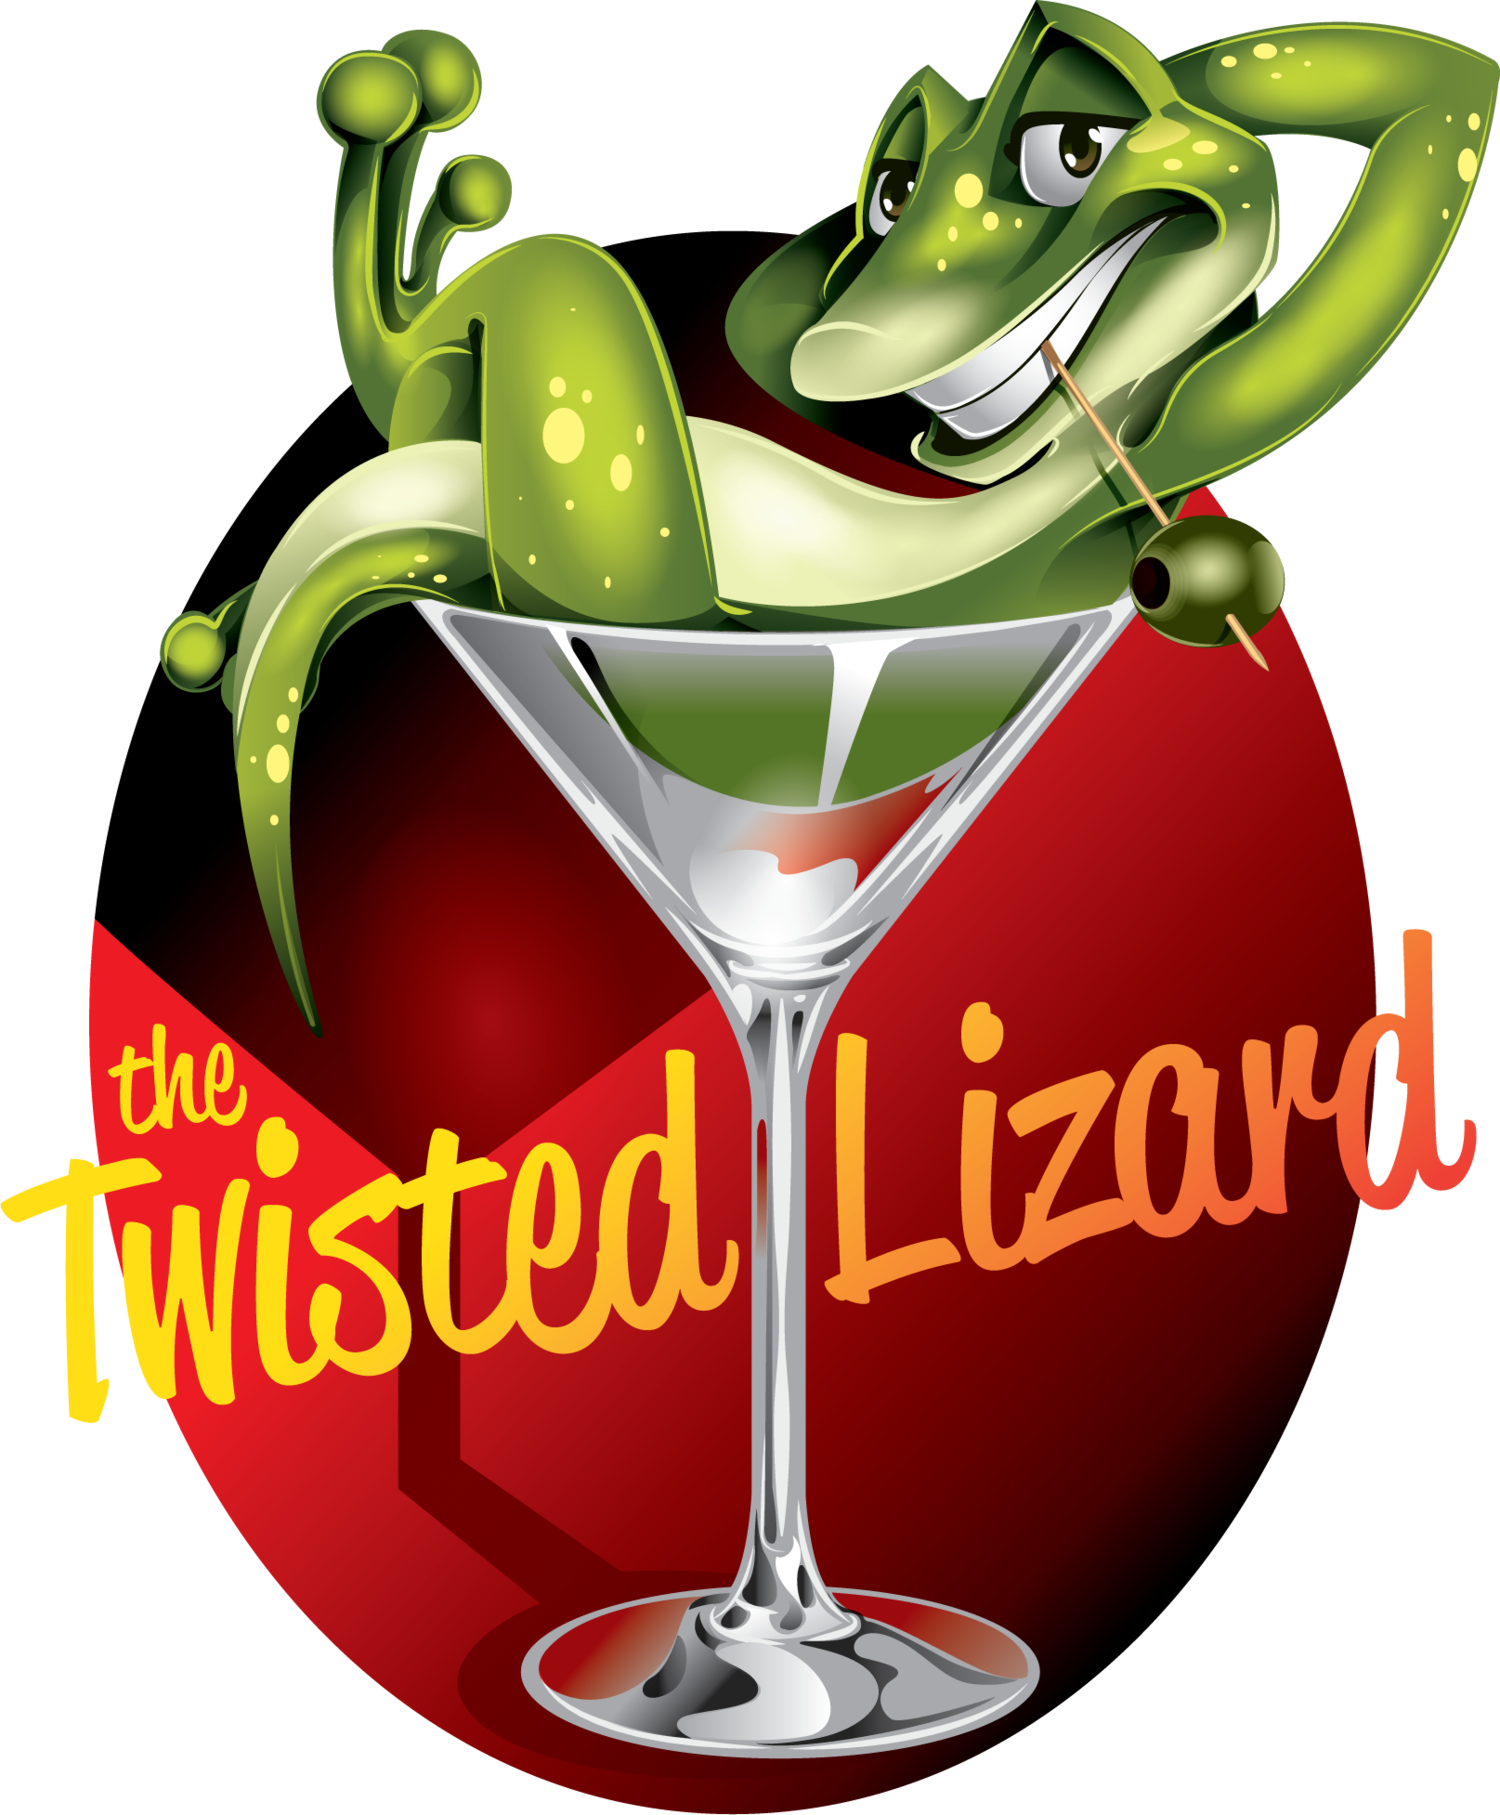 The Twisted Lizard